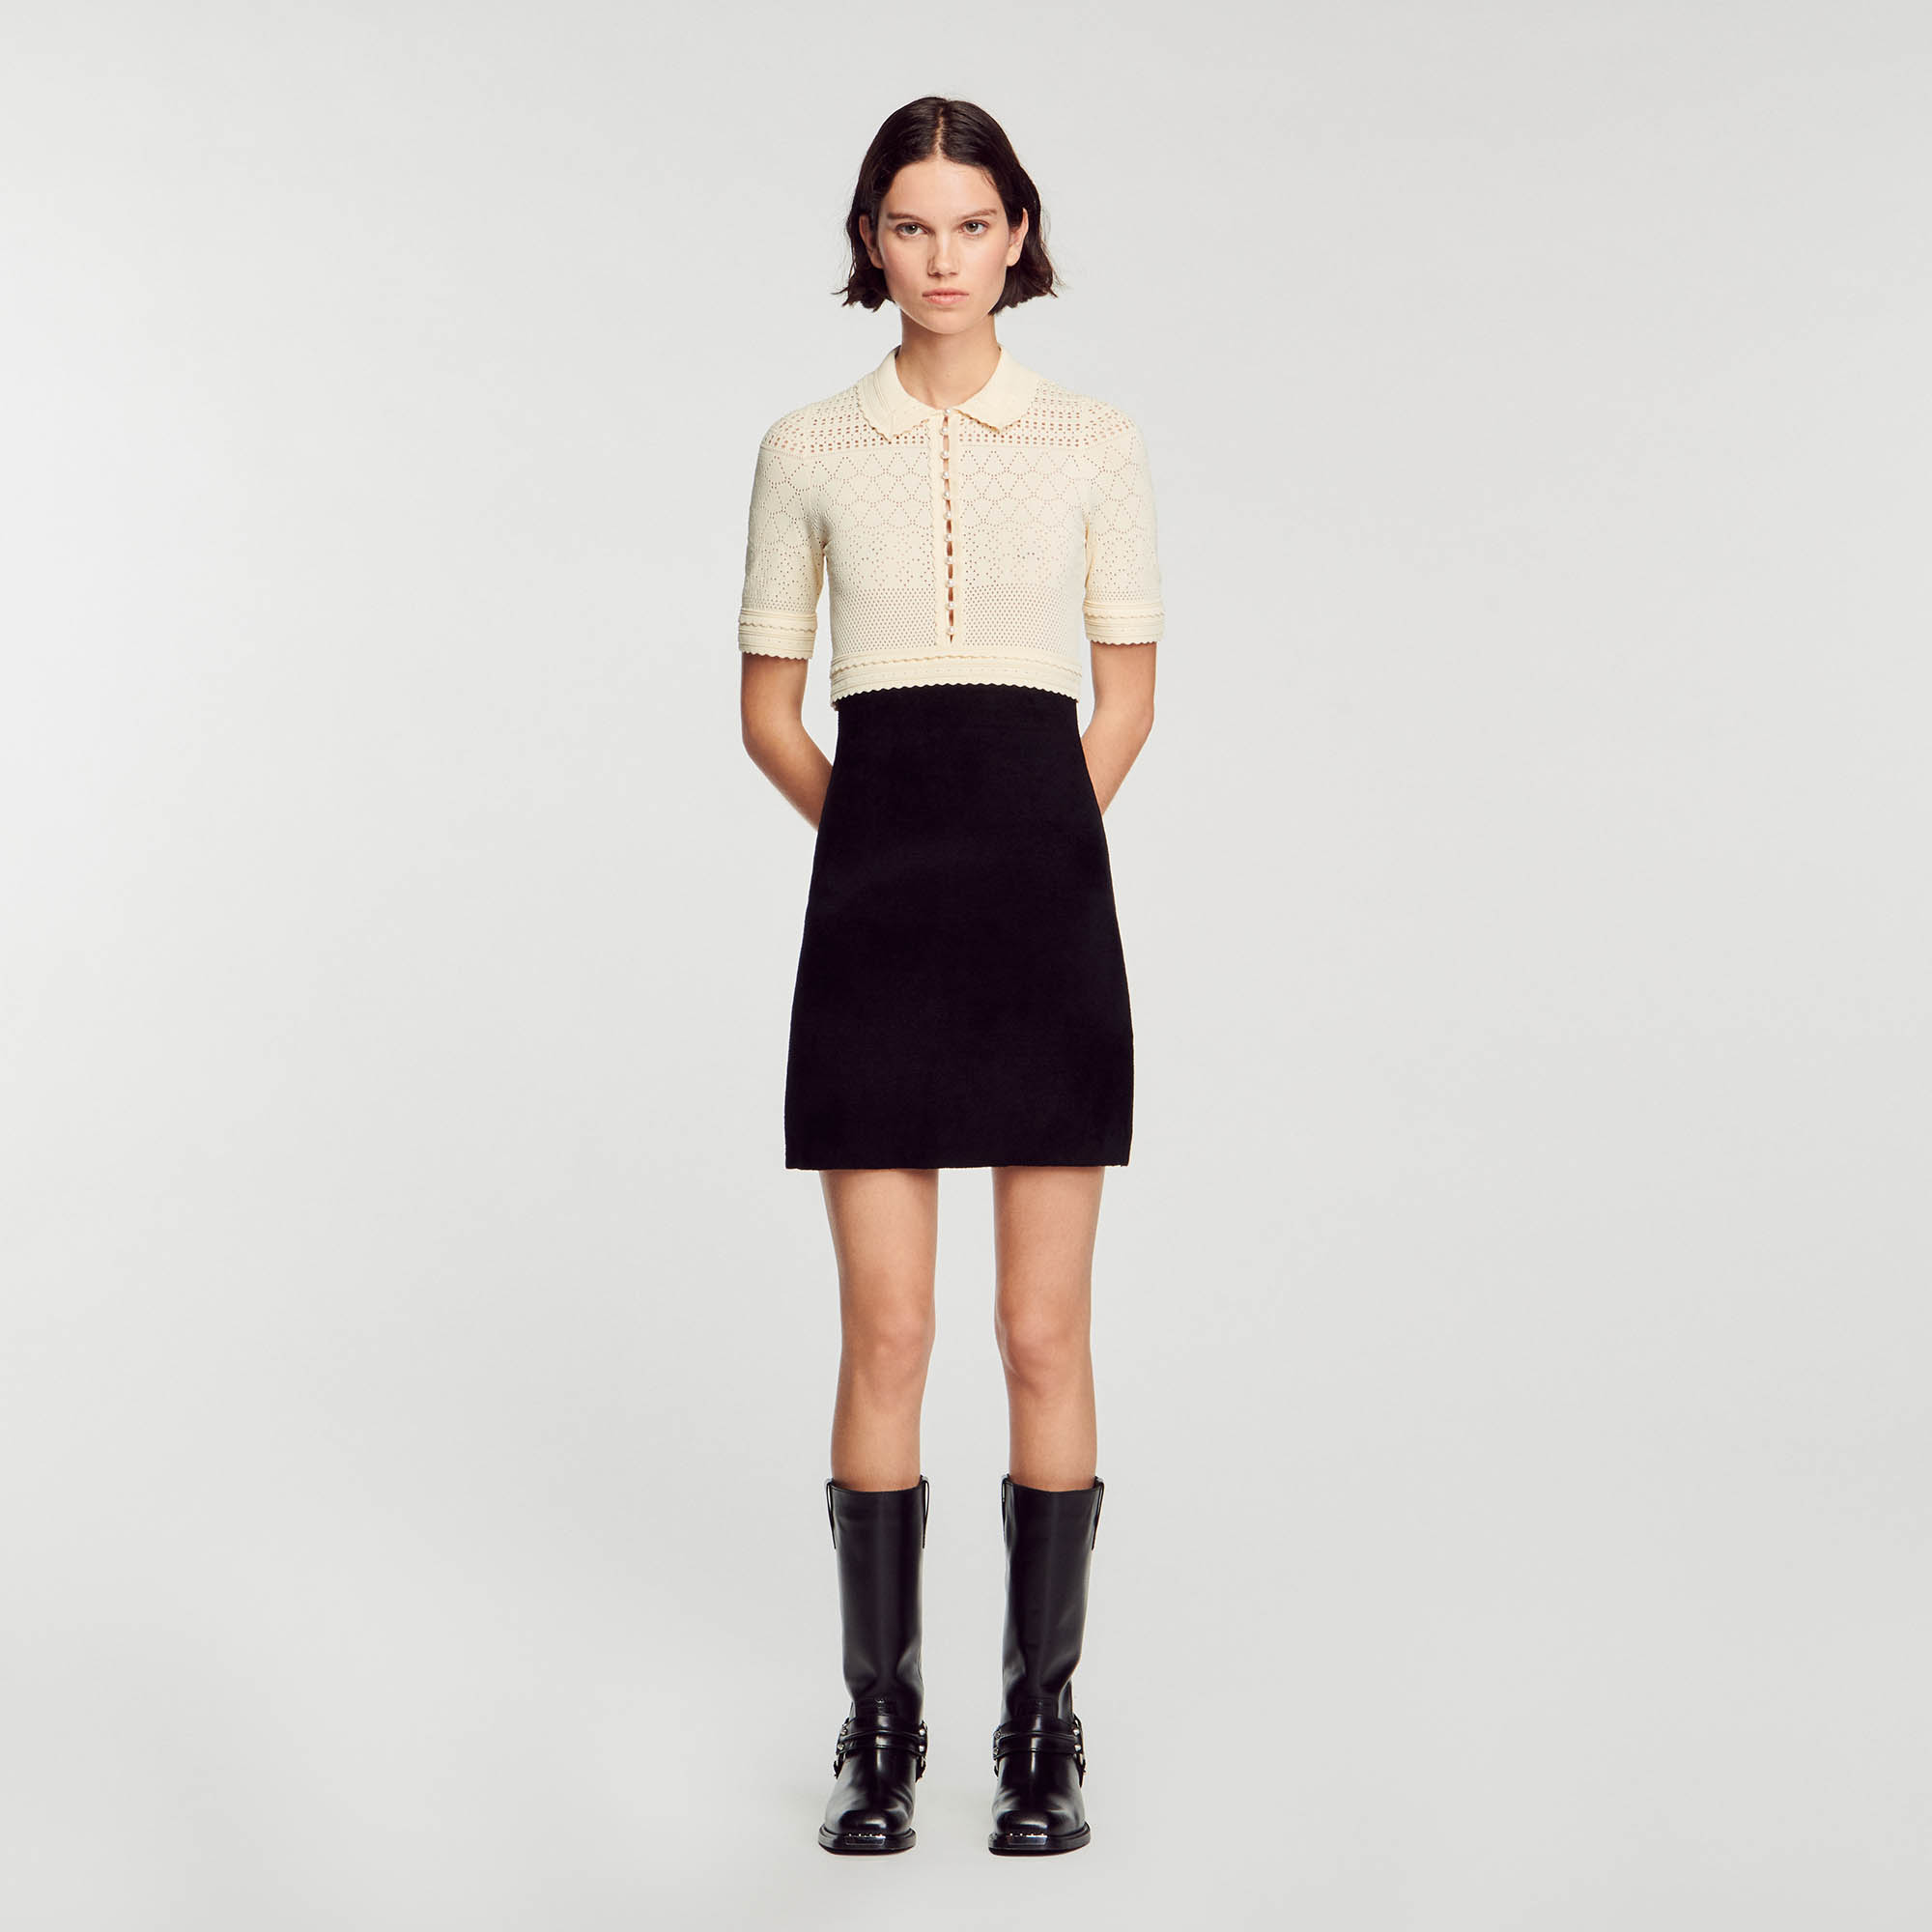 Sandro viscose Short two-tone dress featuring a contrasting pointelle knit top with a polo collar and short sleeves, and a flared skirt